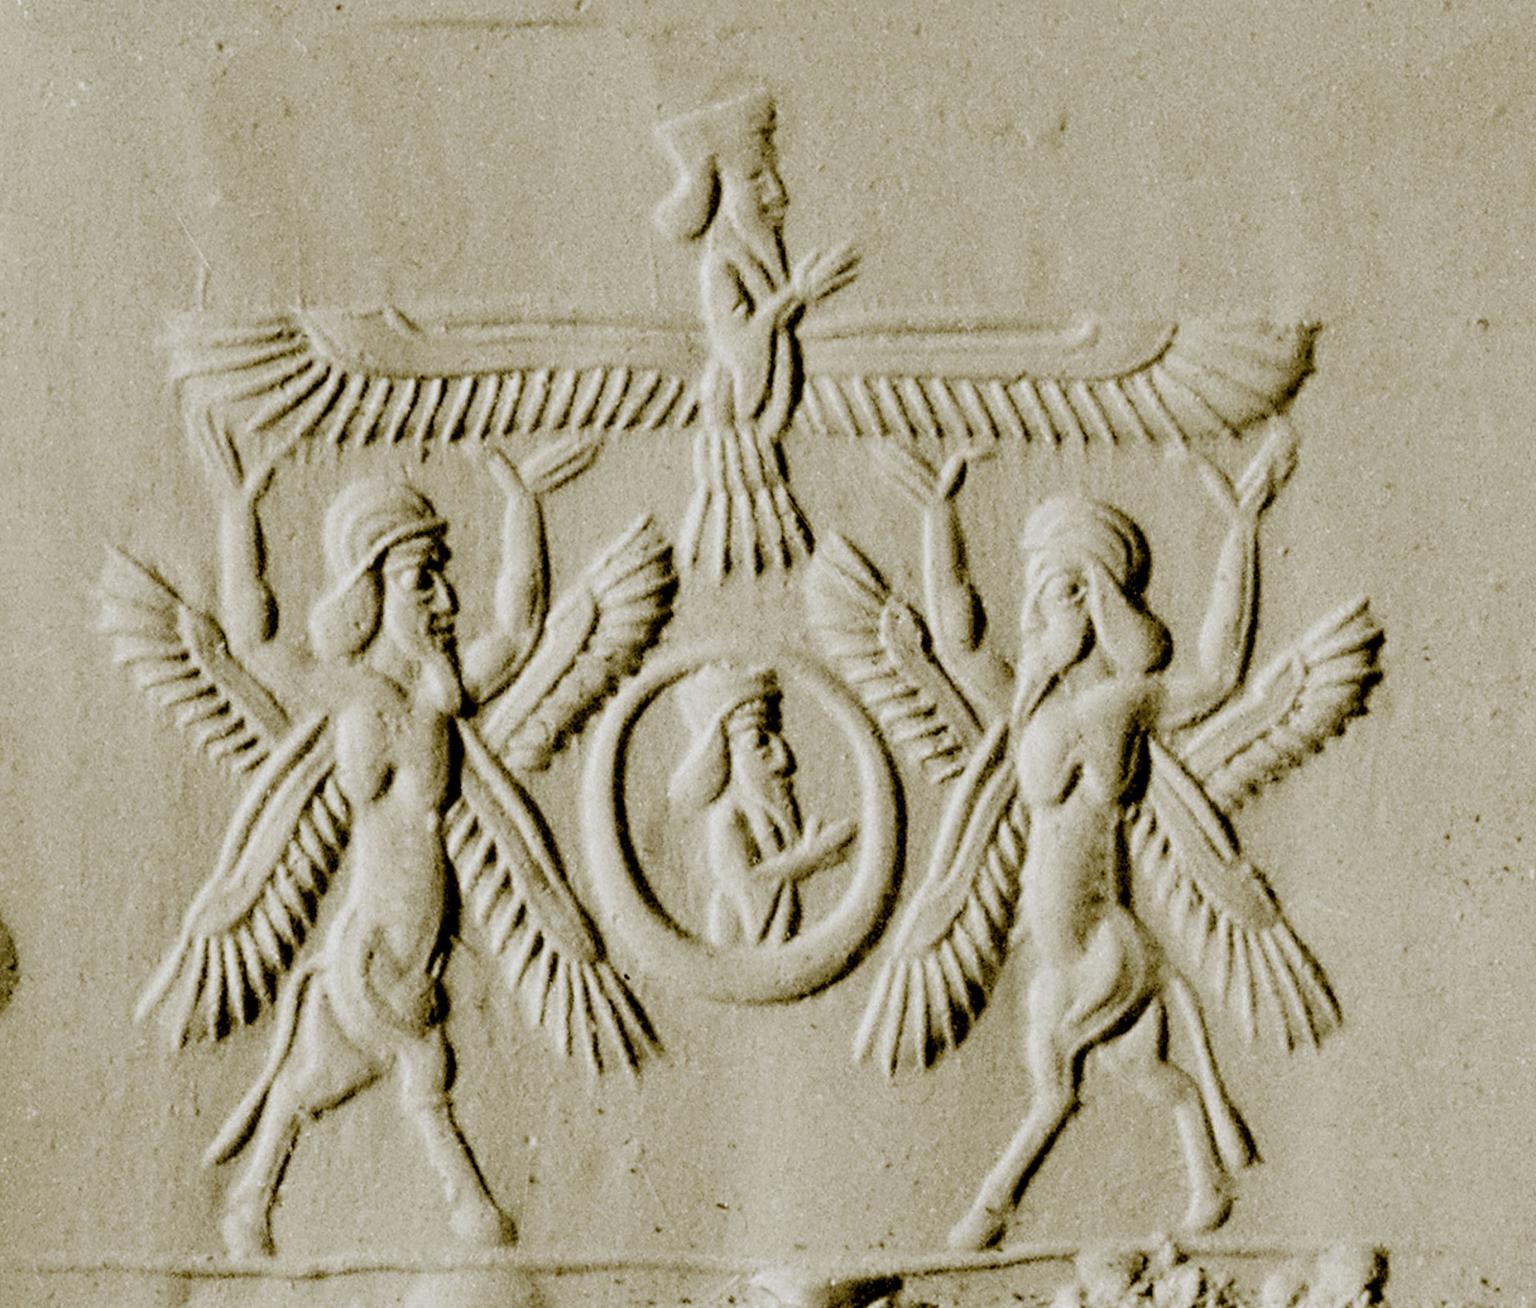 Impression of two winged figures holding up a third winged figure.